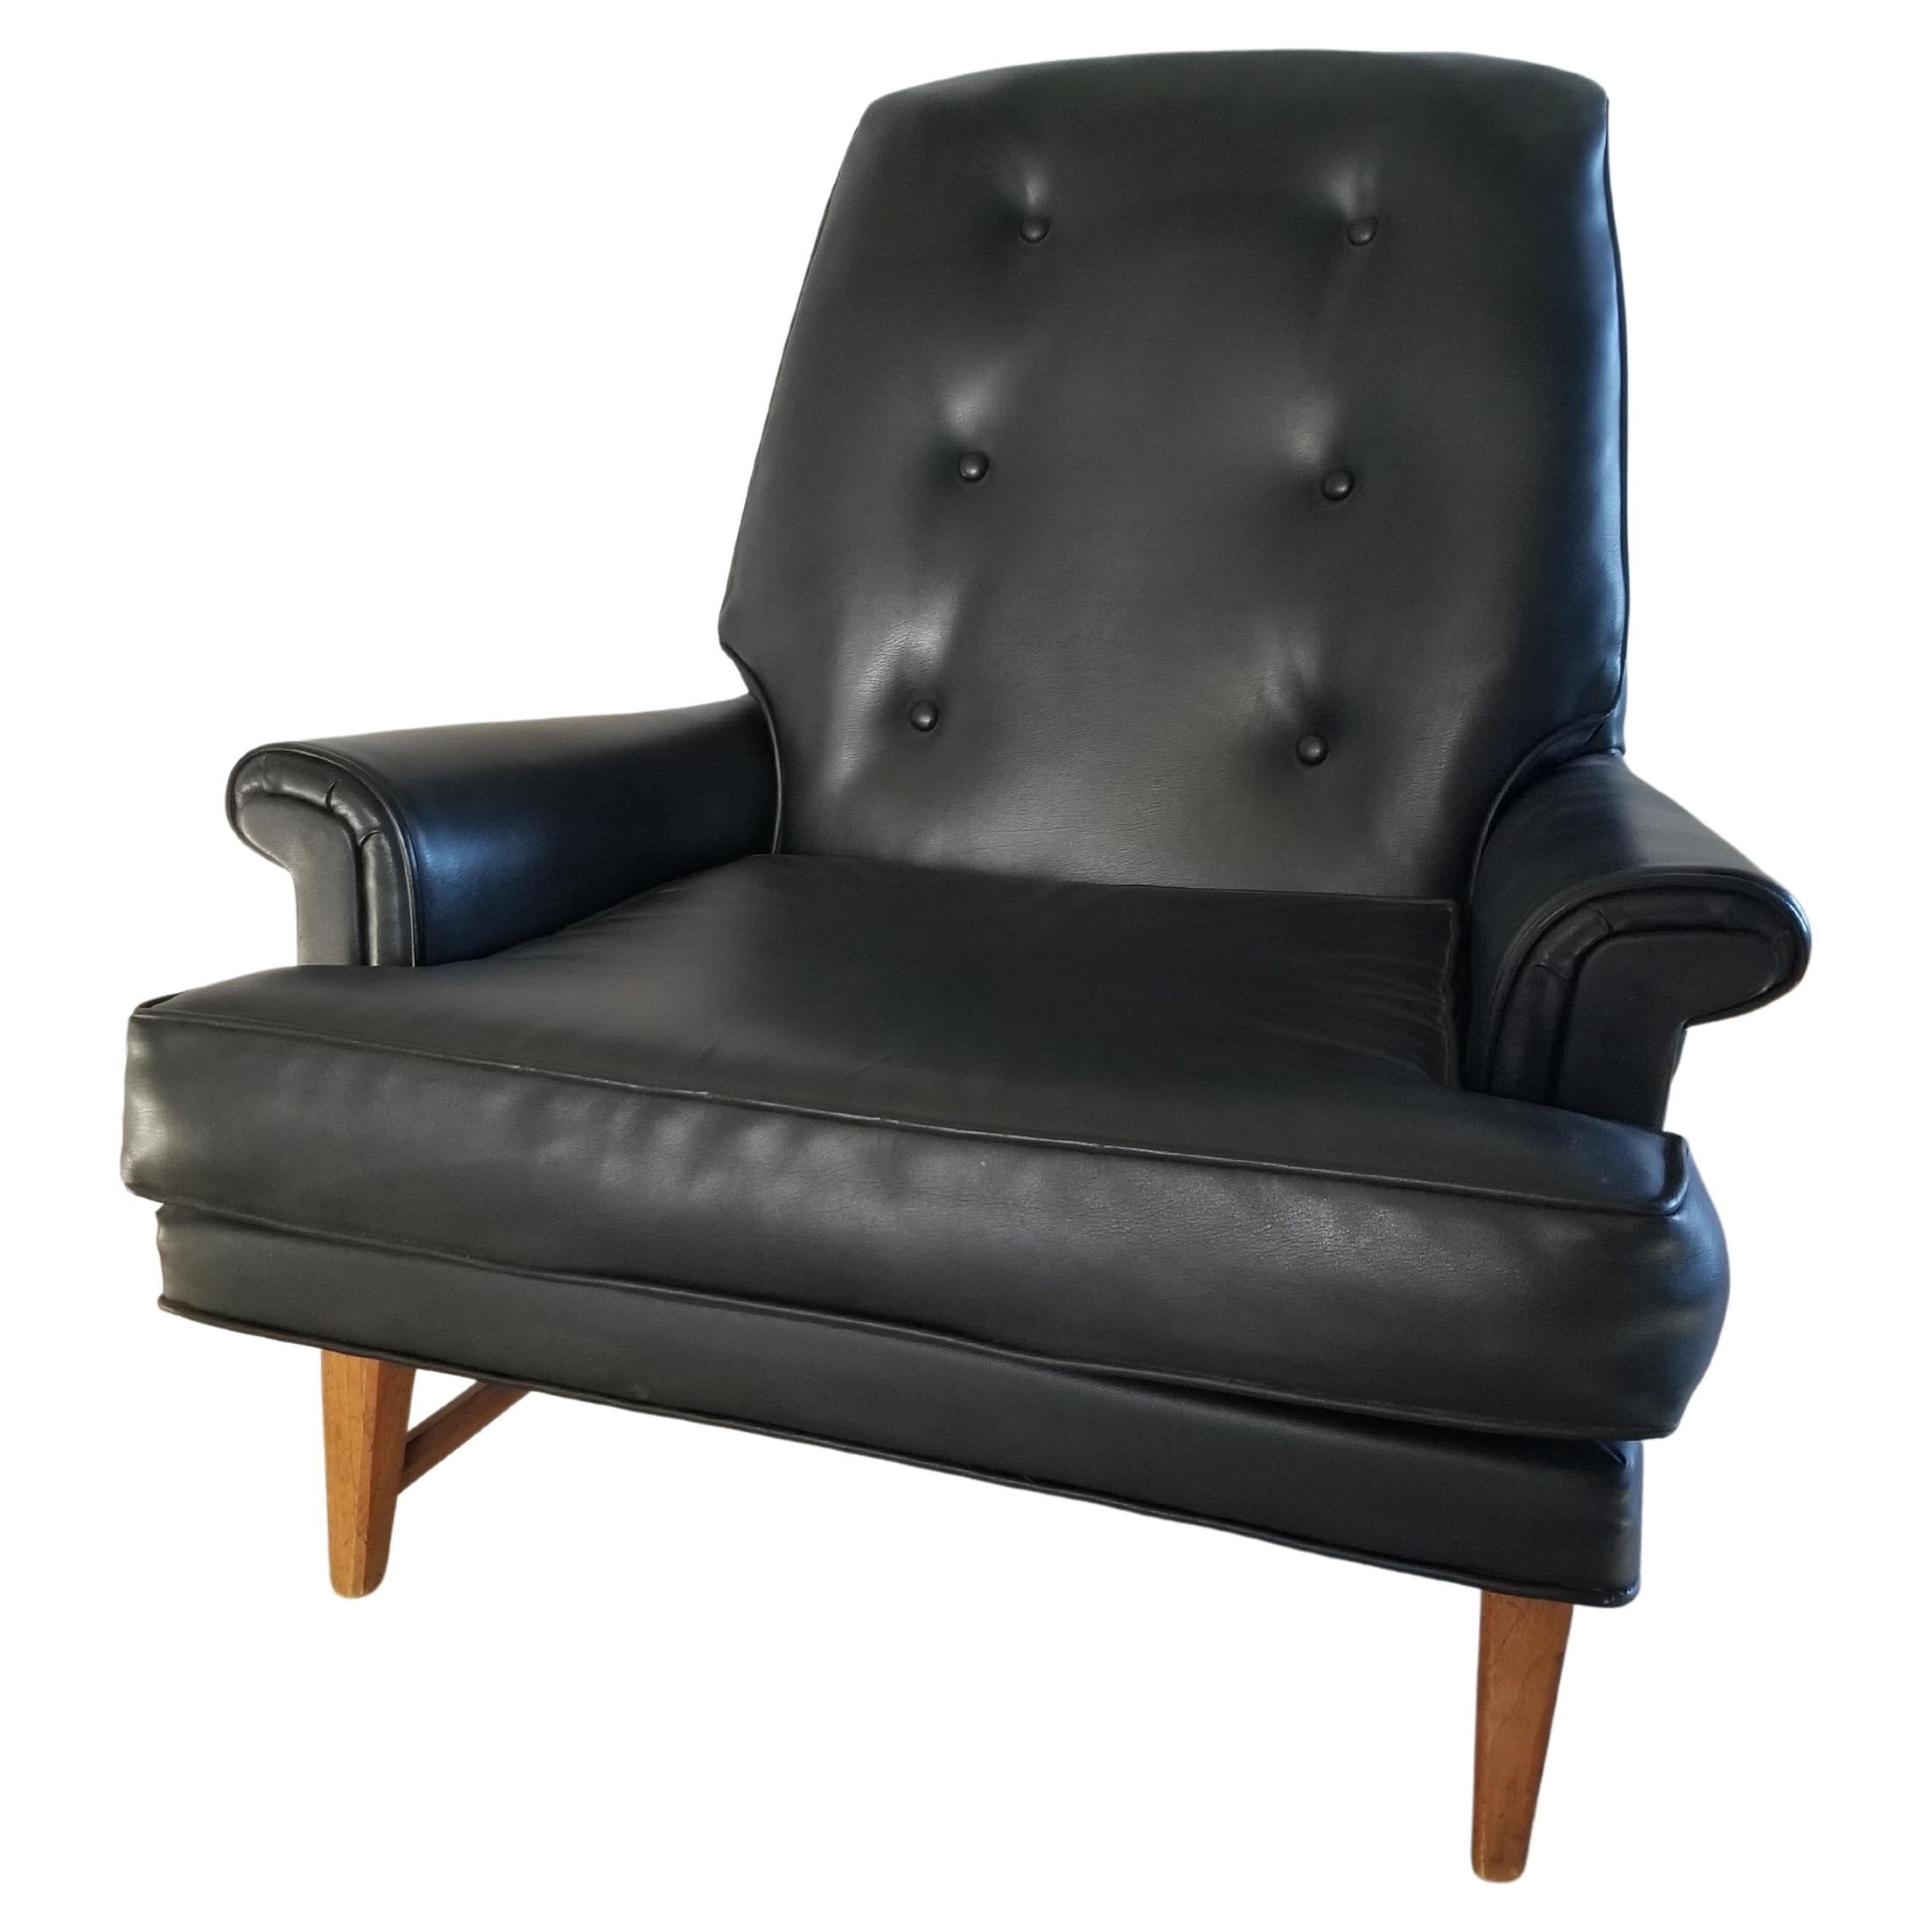 1950s MCM Heritage Faux Leather Mahogany Lounge Chair For Sale